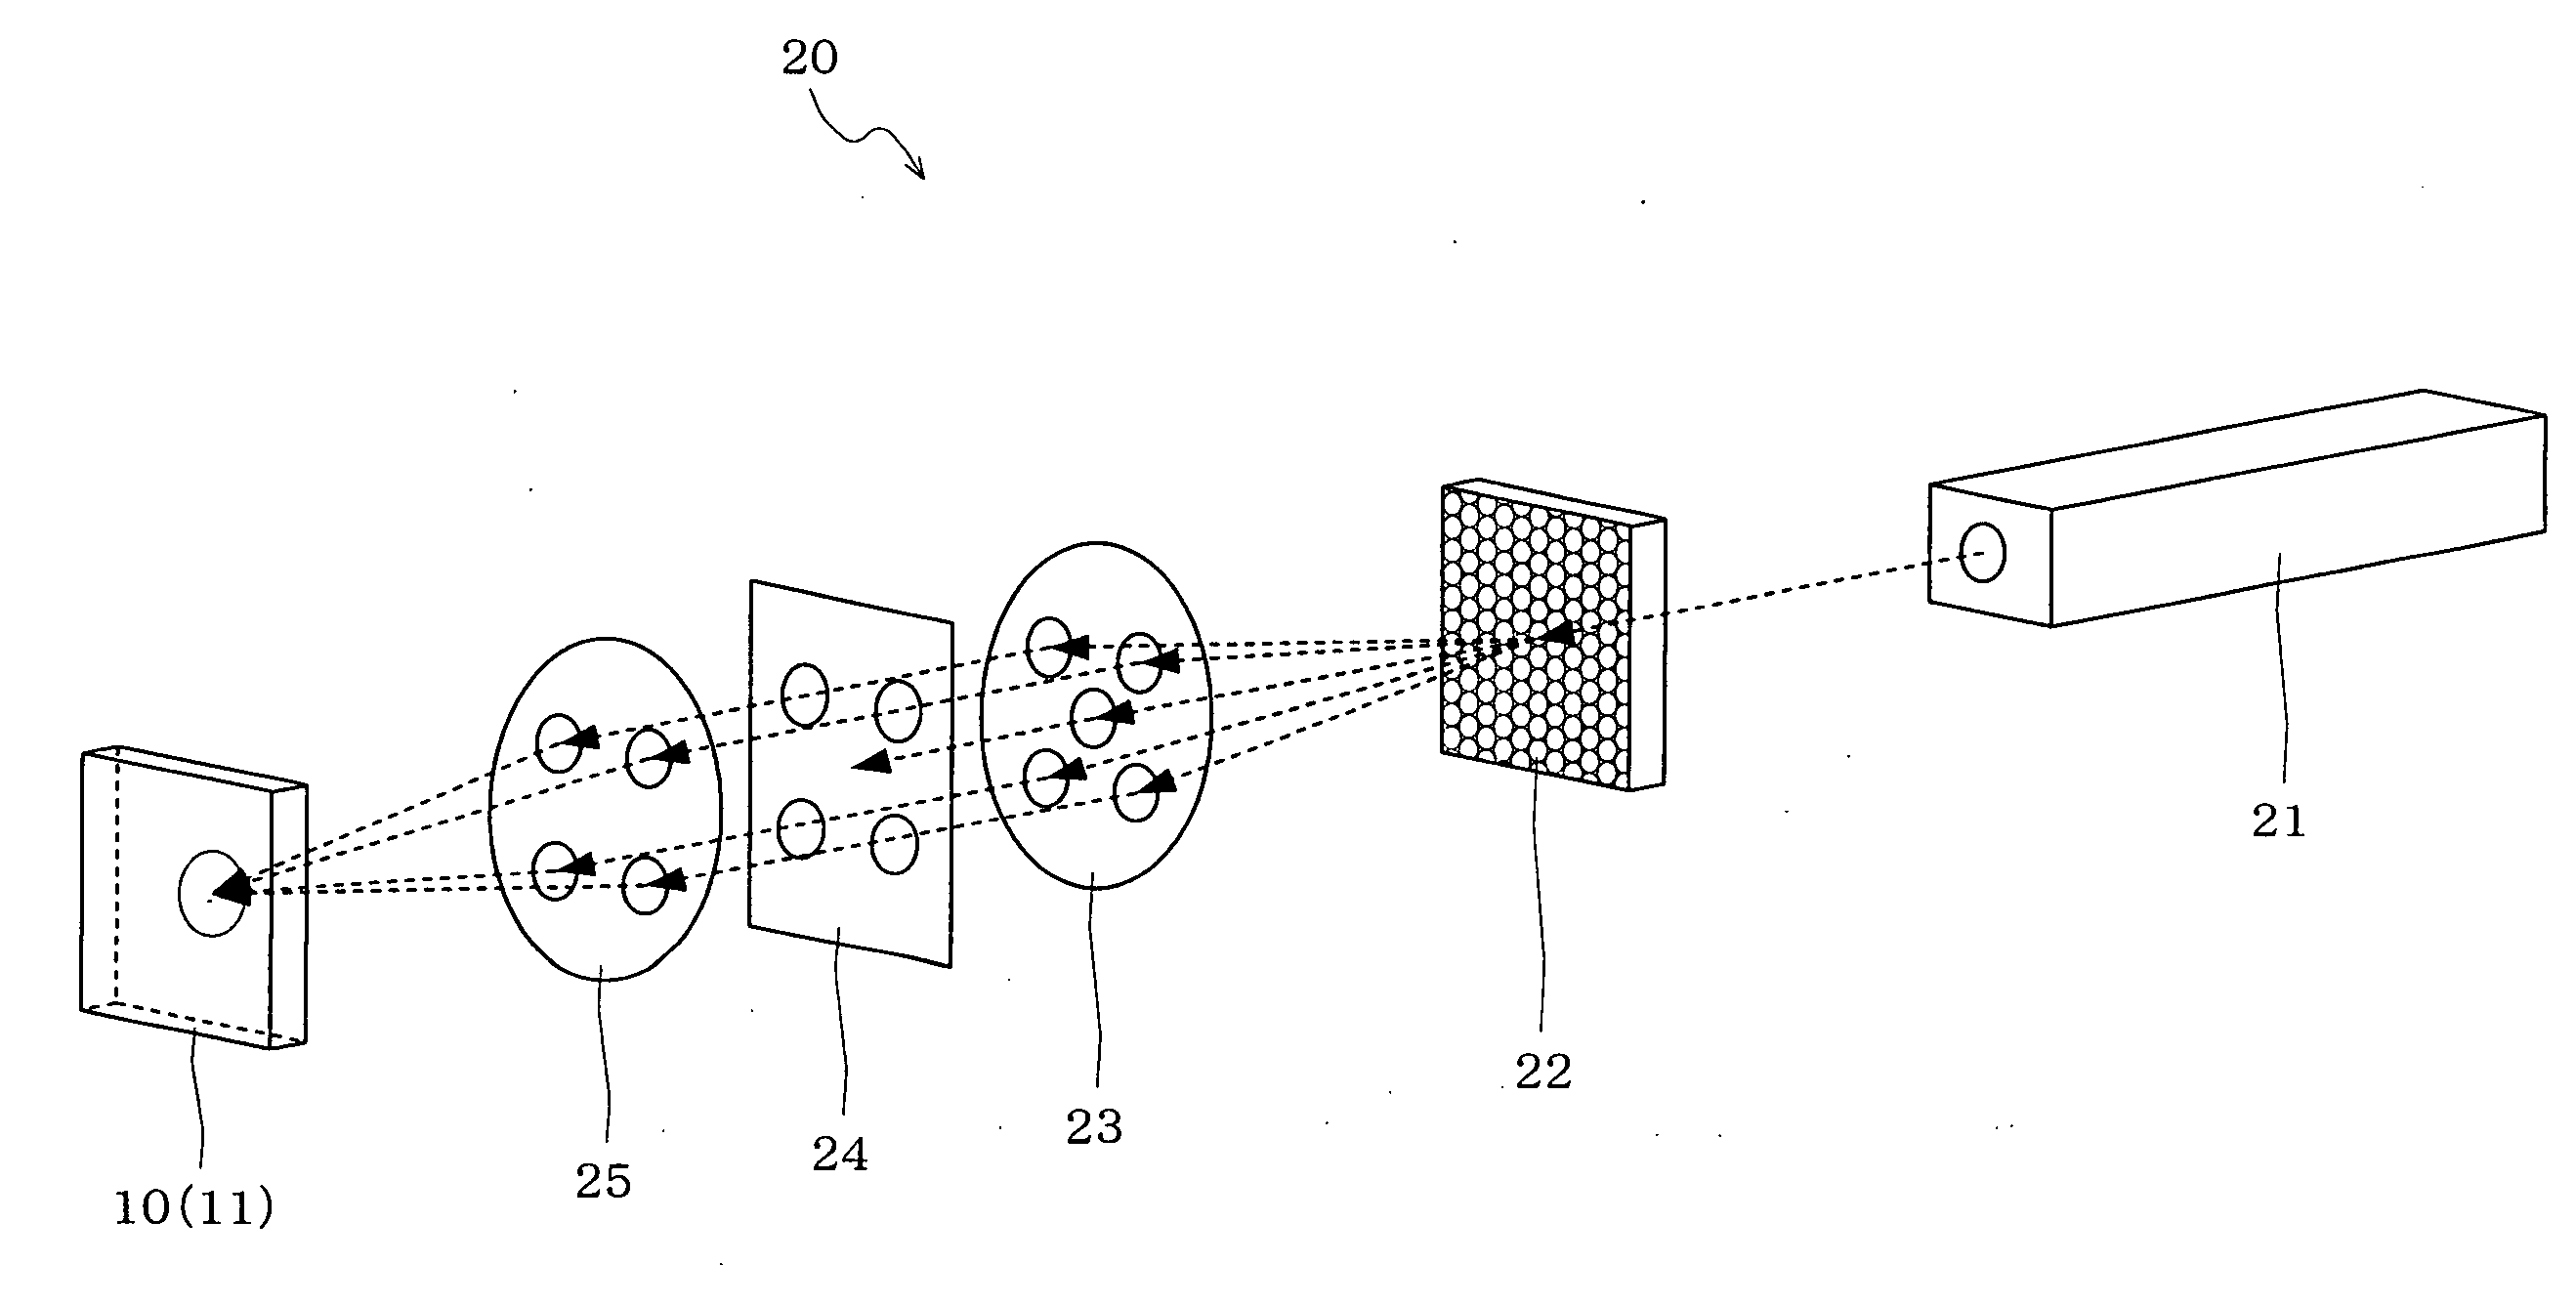 Structure, method of forming structure, method of laser processing, and method of discriminating between true and false objects